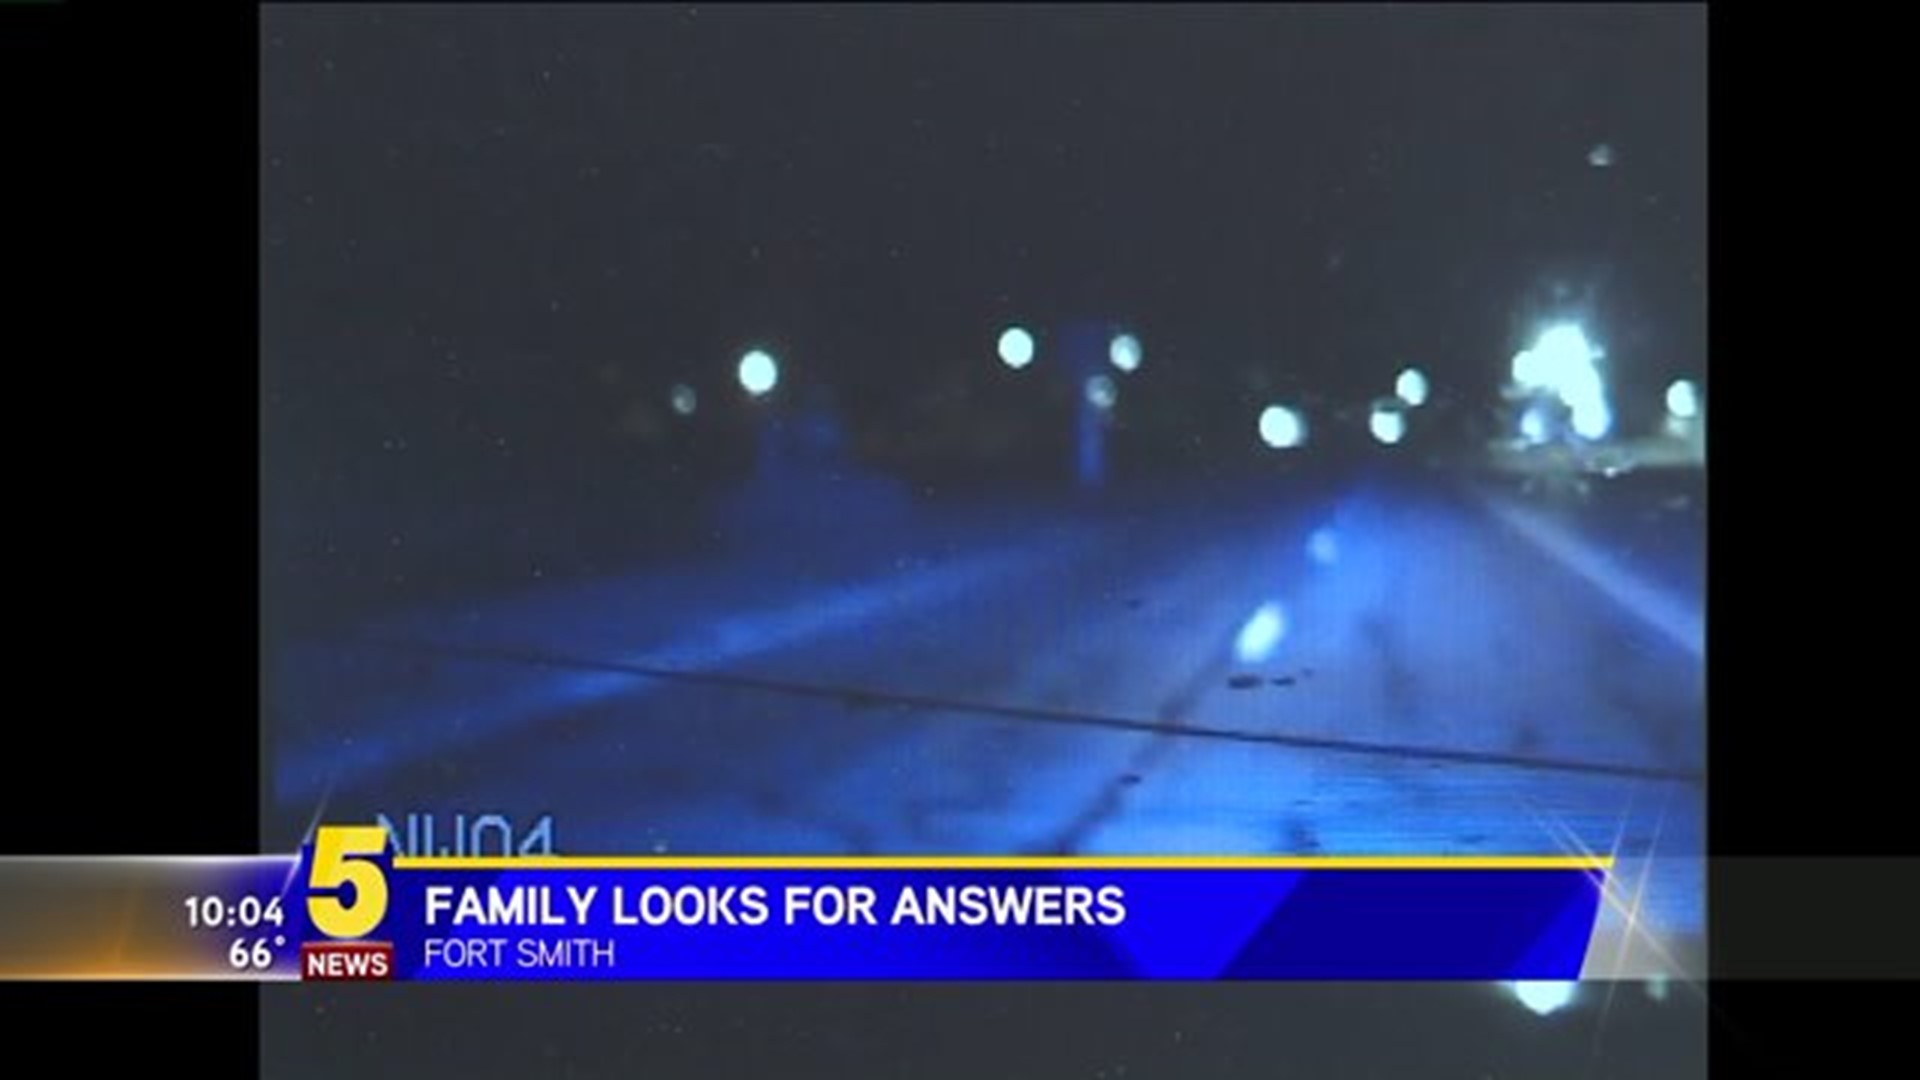 Family Looks For Answers